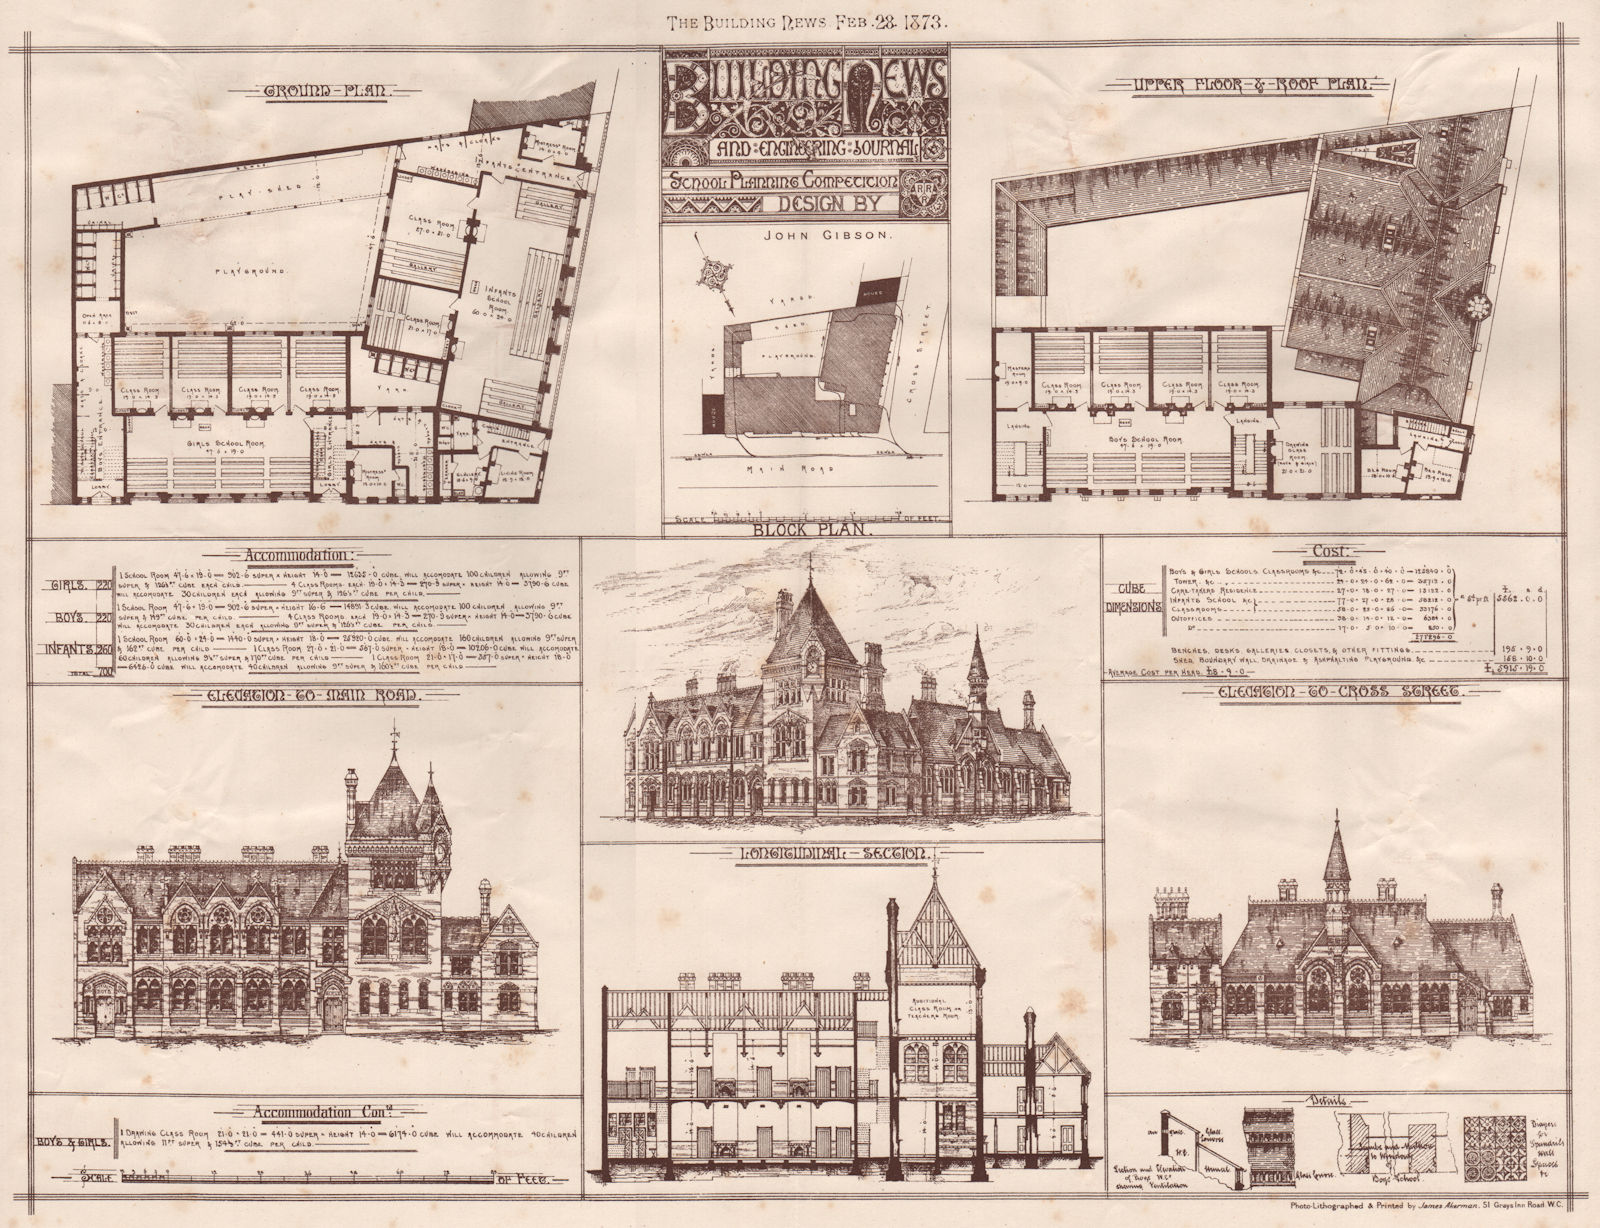 Associate Product Building News School Planning competition; designed by John Gibbson 1873 print